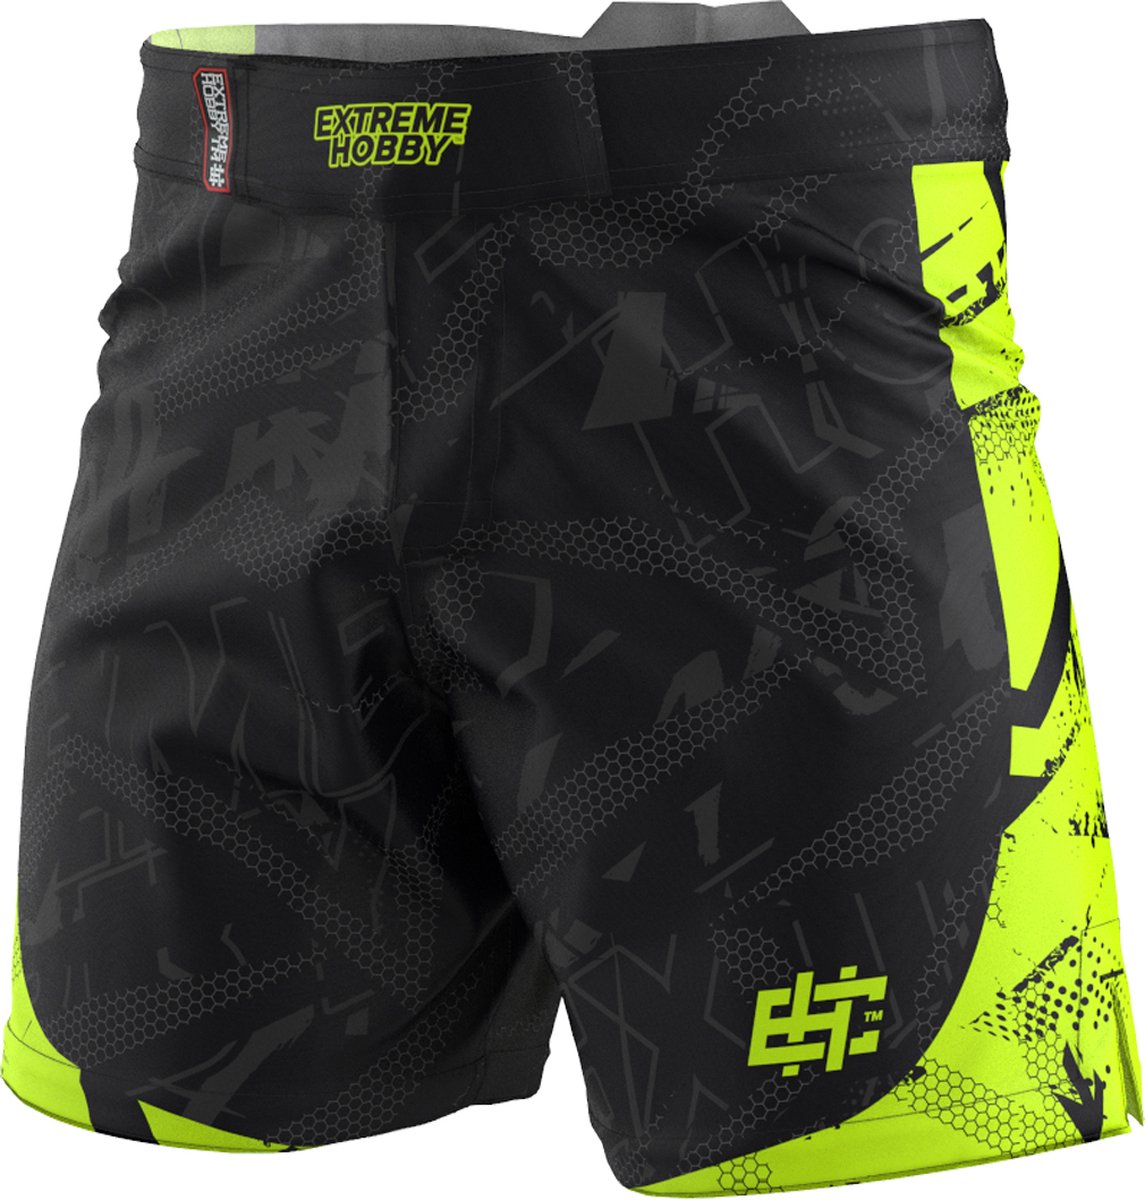 Extreme Hobby - Grappling Shorts - MMA vechtshorts - Fight Shorts - Neo Lime - Zwart, Lime - Maat XL